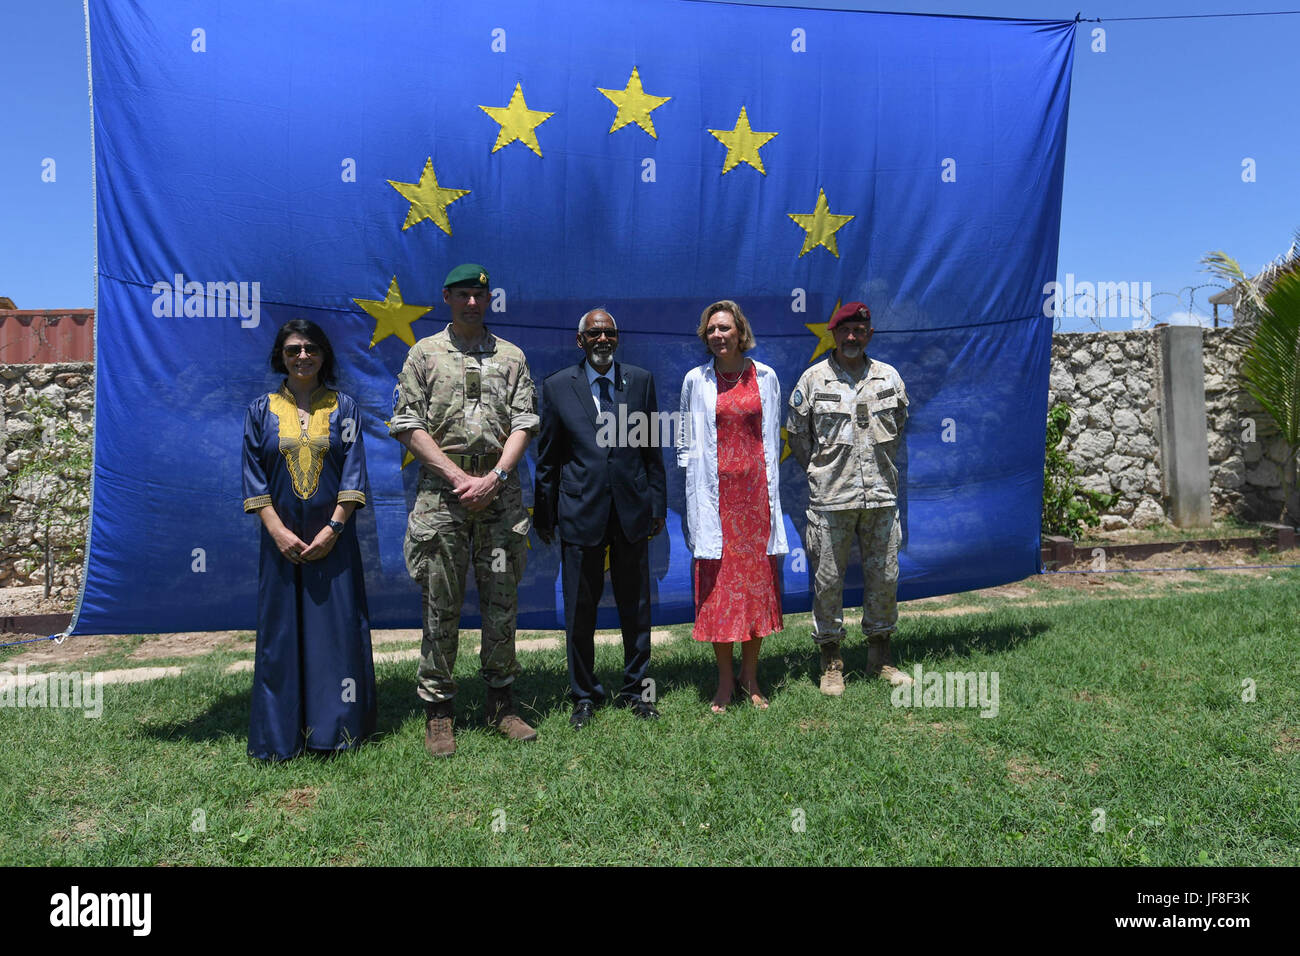 Mohamed Sheikh Osman Jawari, the Speaker of the Somalia Federal Parliament (middle), Veronique Lorenzo, the European Union (EU) Ambassador to Somalia (2nd from right), and senior officials from EU in a group photo during a ceremony to mark Europe Day in Mogadishu on May 09, 2017. AMISOM Photo / Omar Abdisalan Stock Photo